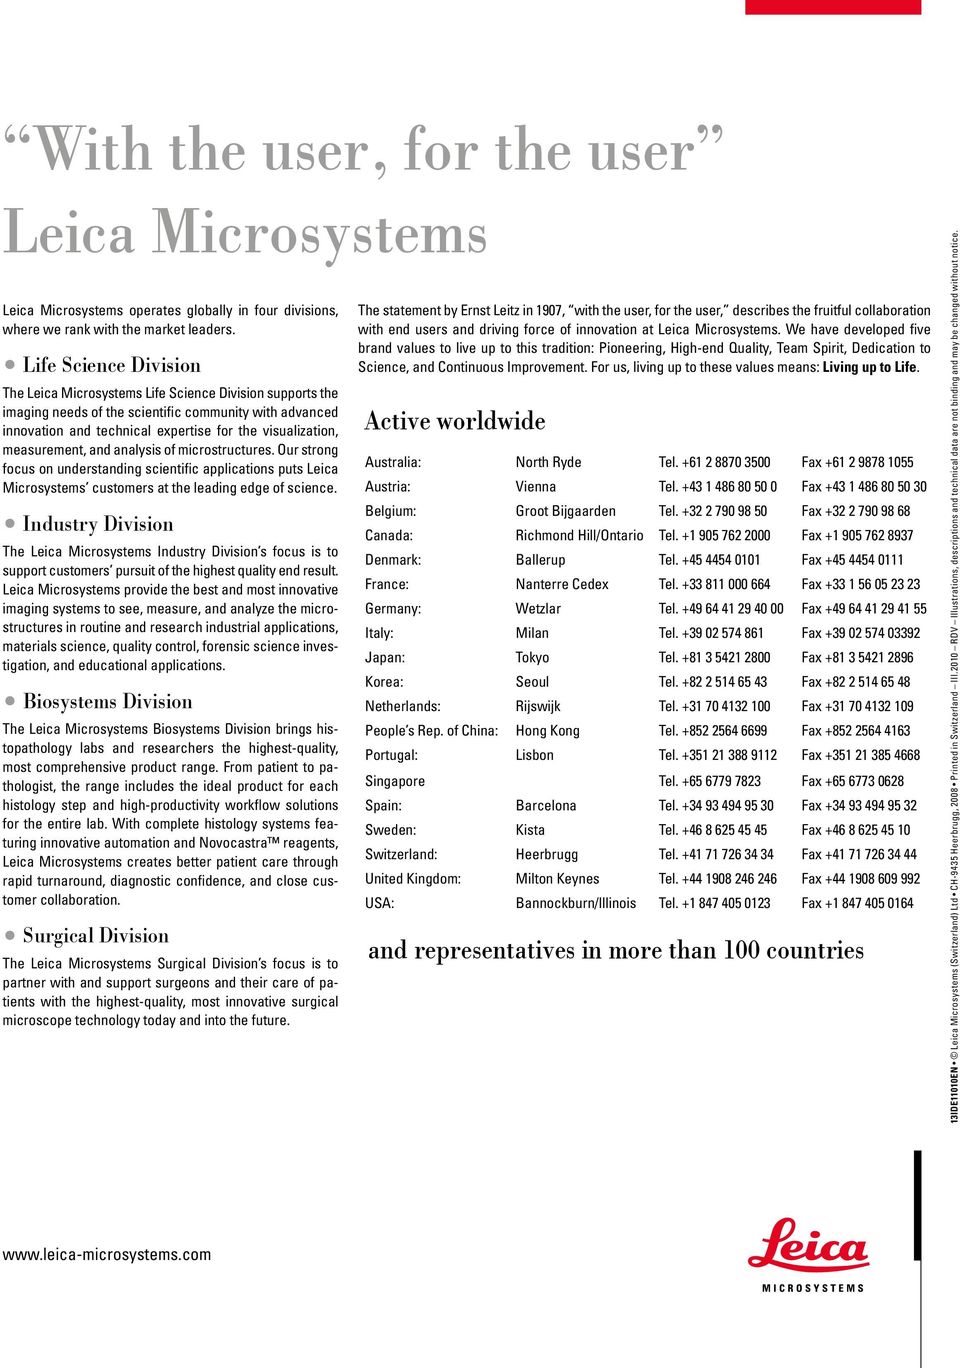 measurement, and analysis of microstructures. Our strong focus on understanding scientific applications puts Leica Microsystems customers at the leading edge of science.